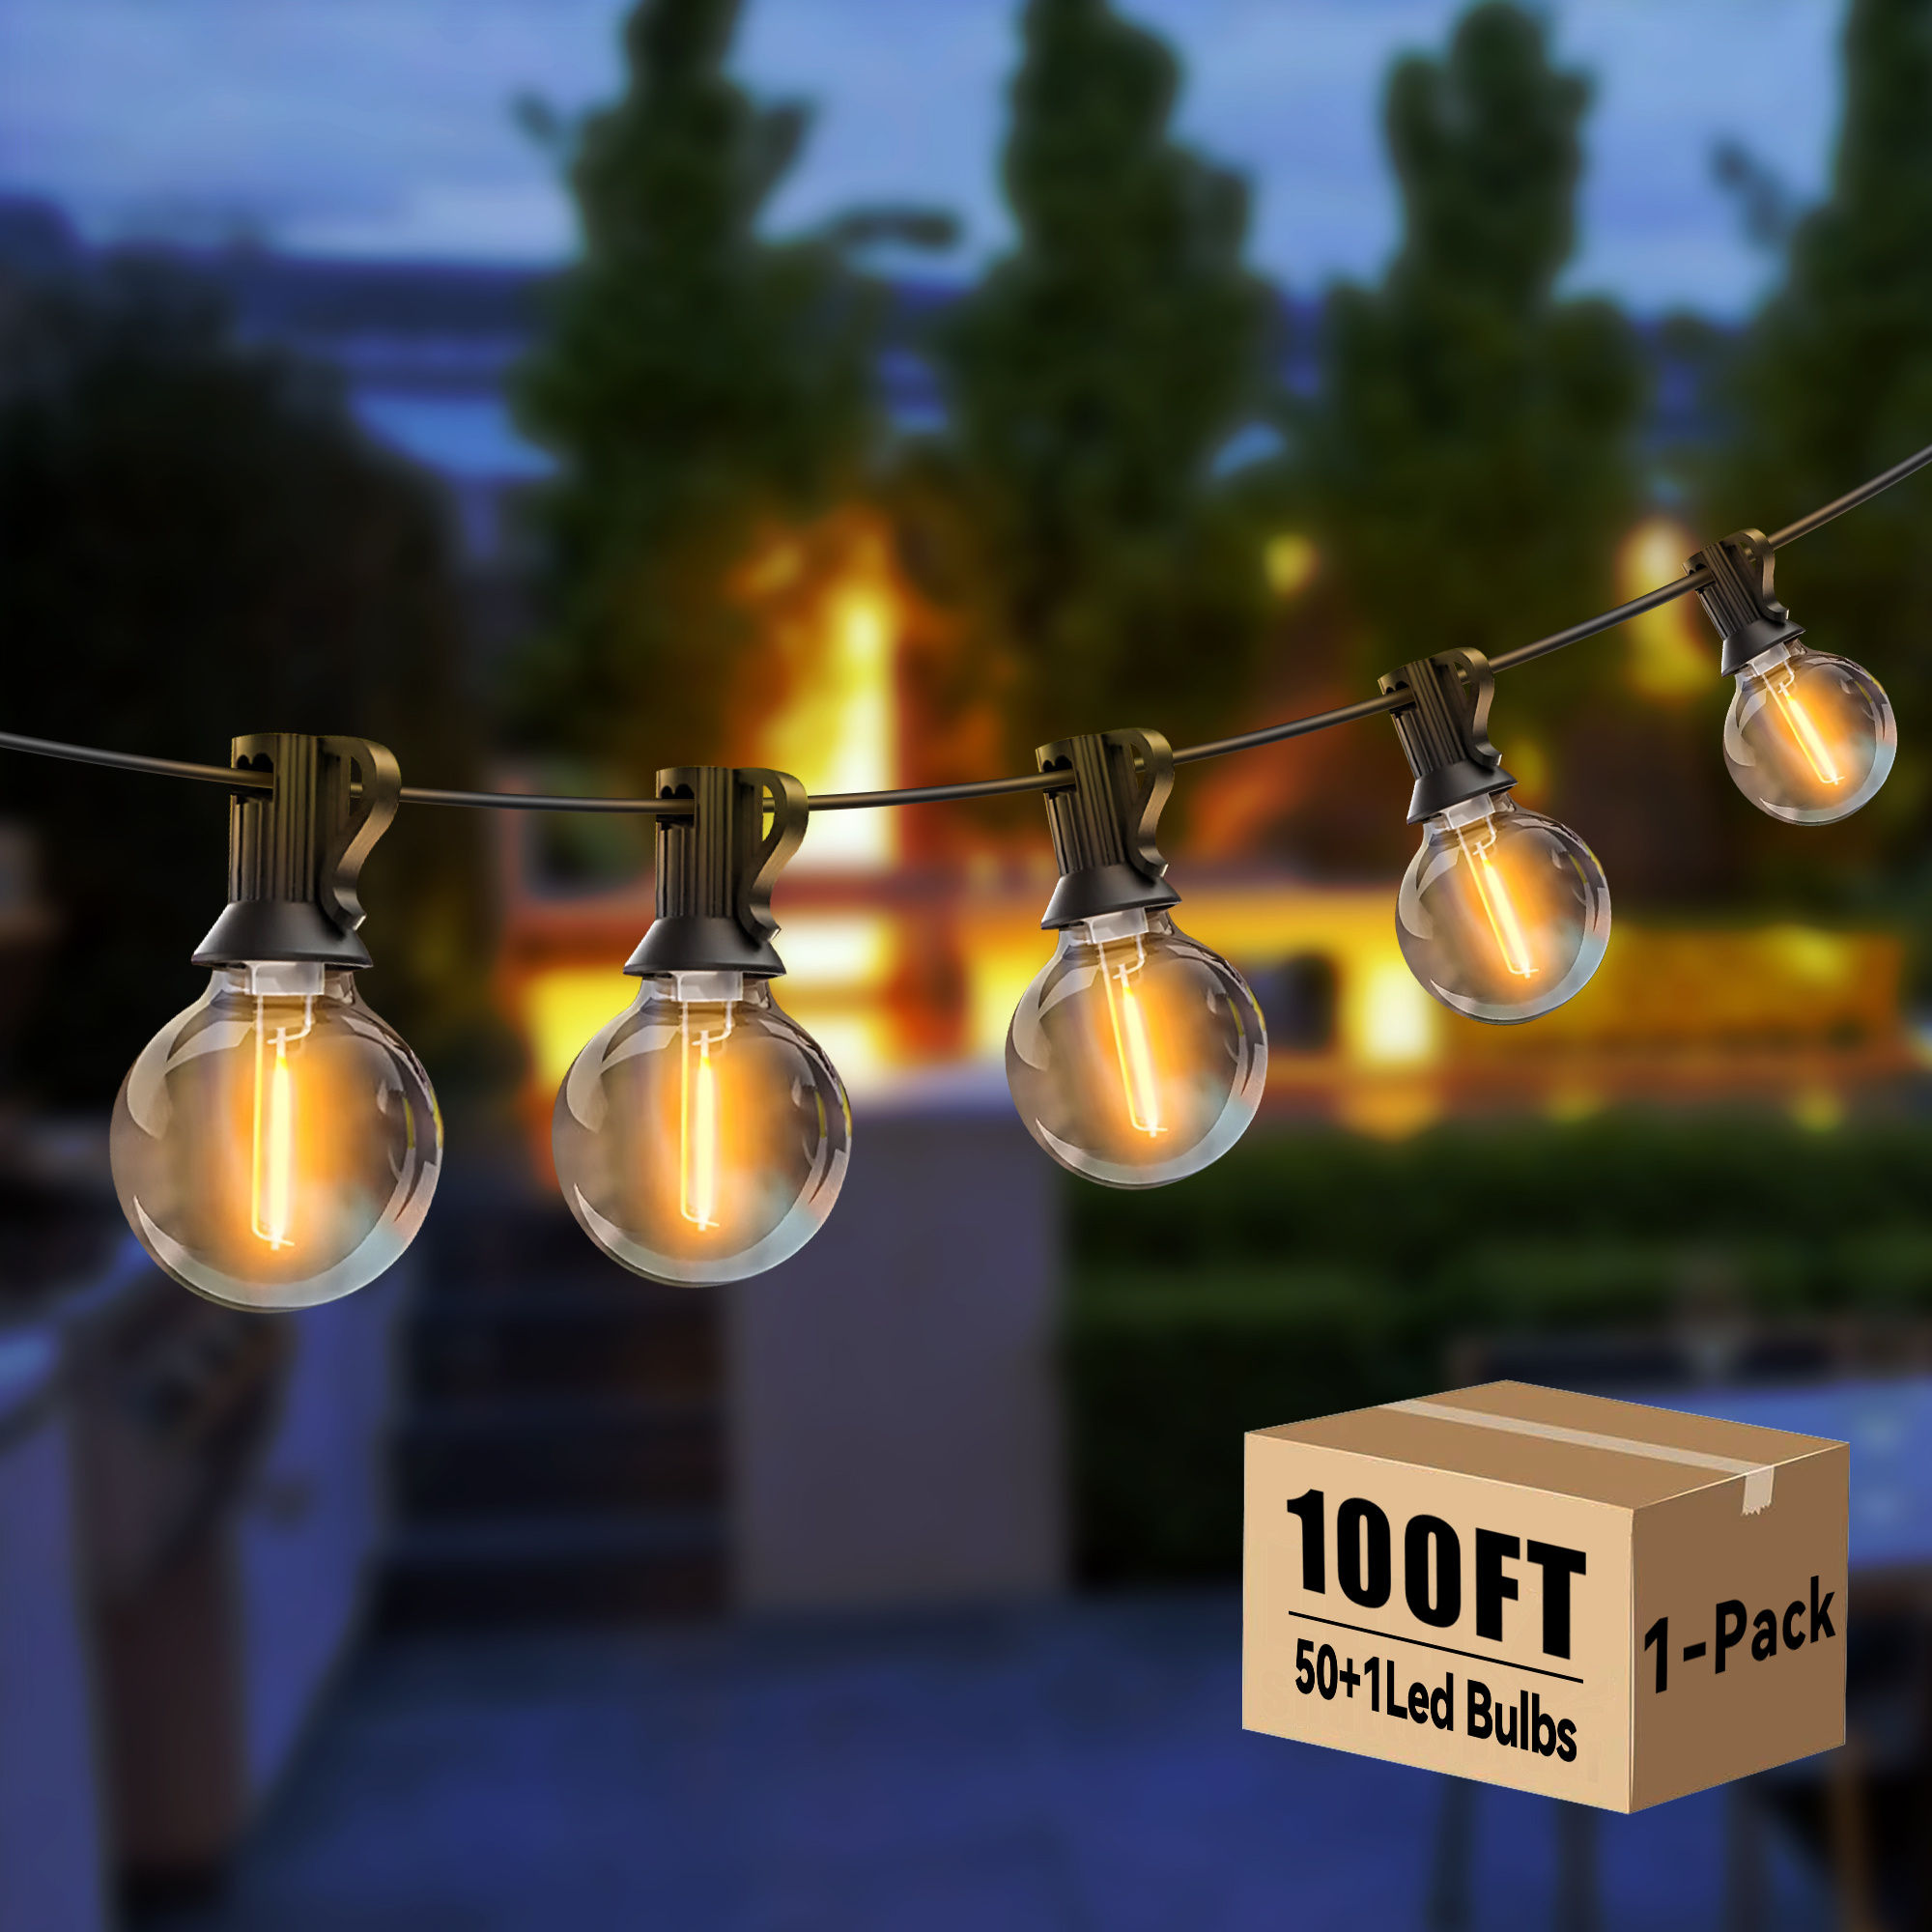 DAYBETTER Outdoor String Lights,100ft,with 50 G40 Edison Vintage Bulbs,Waterproof for Patio Garden Gazebo Bistro Cafe Backyard - image 1 of 10